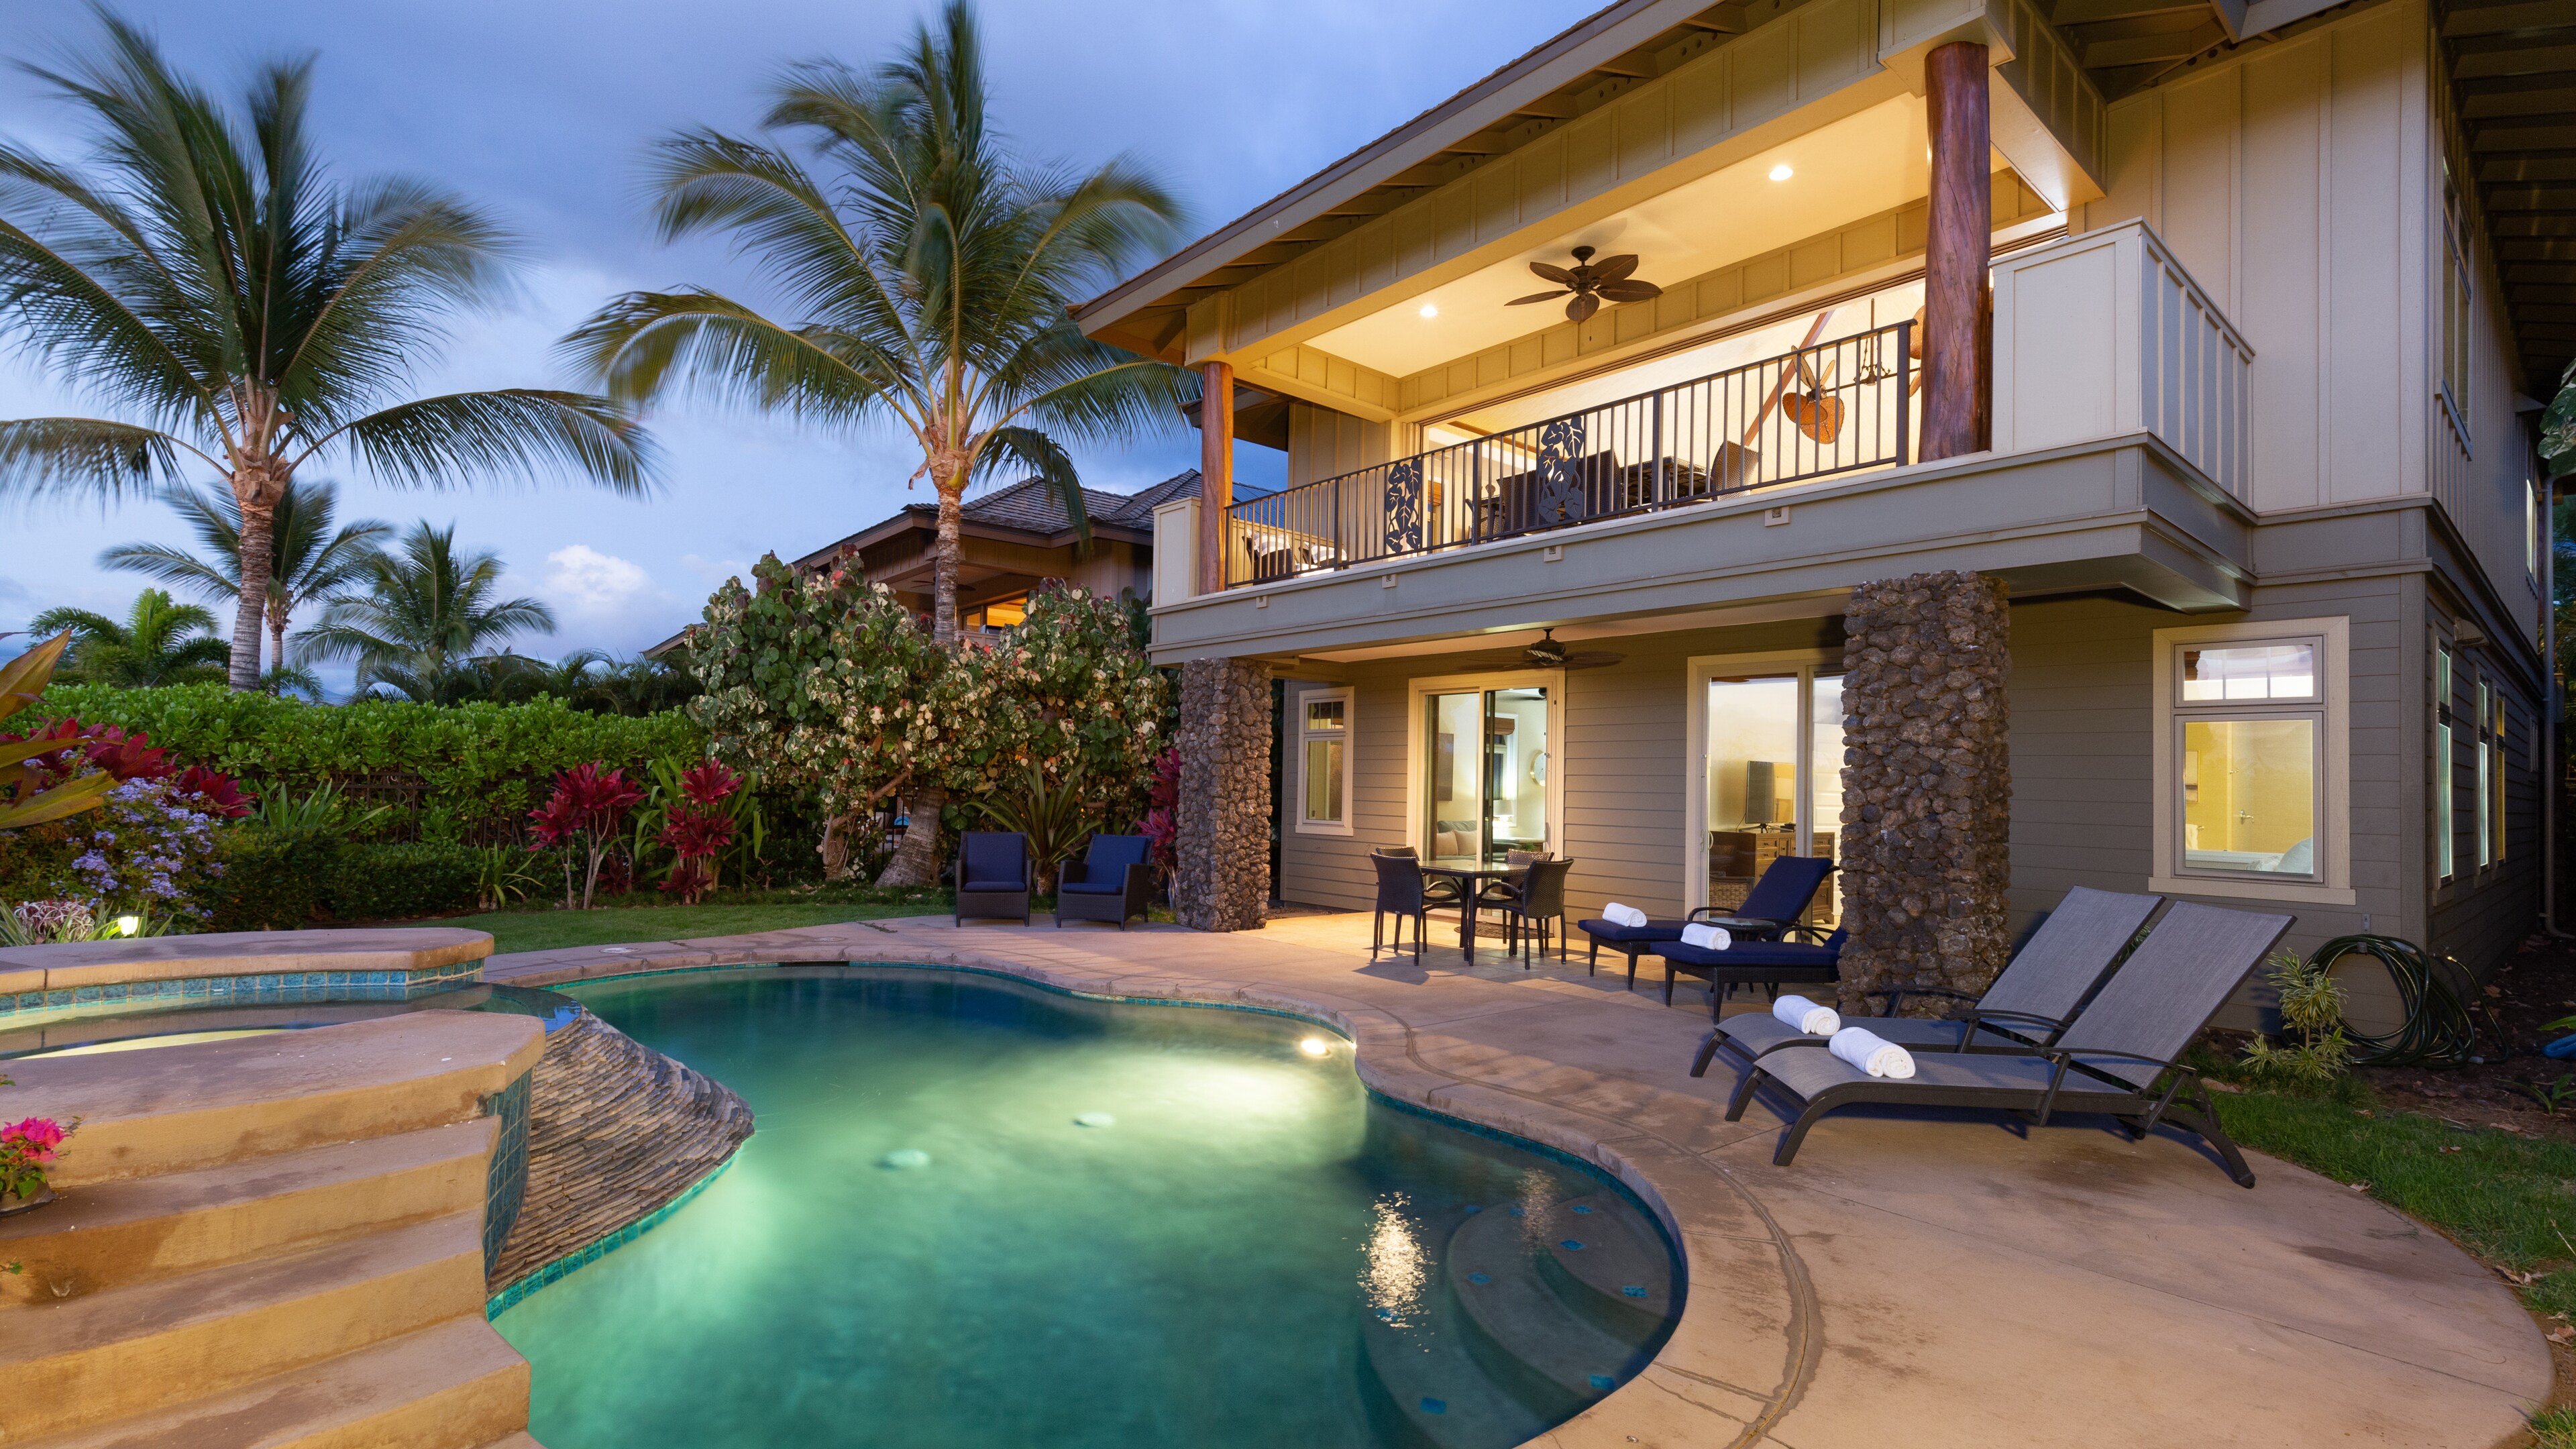 Welcome to Dreams Come True - a stunning home in the Mauna Lani Resort's KaMilo community